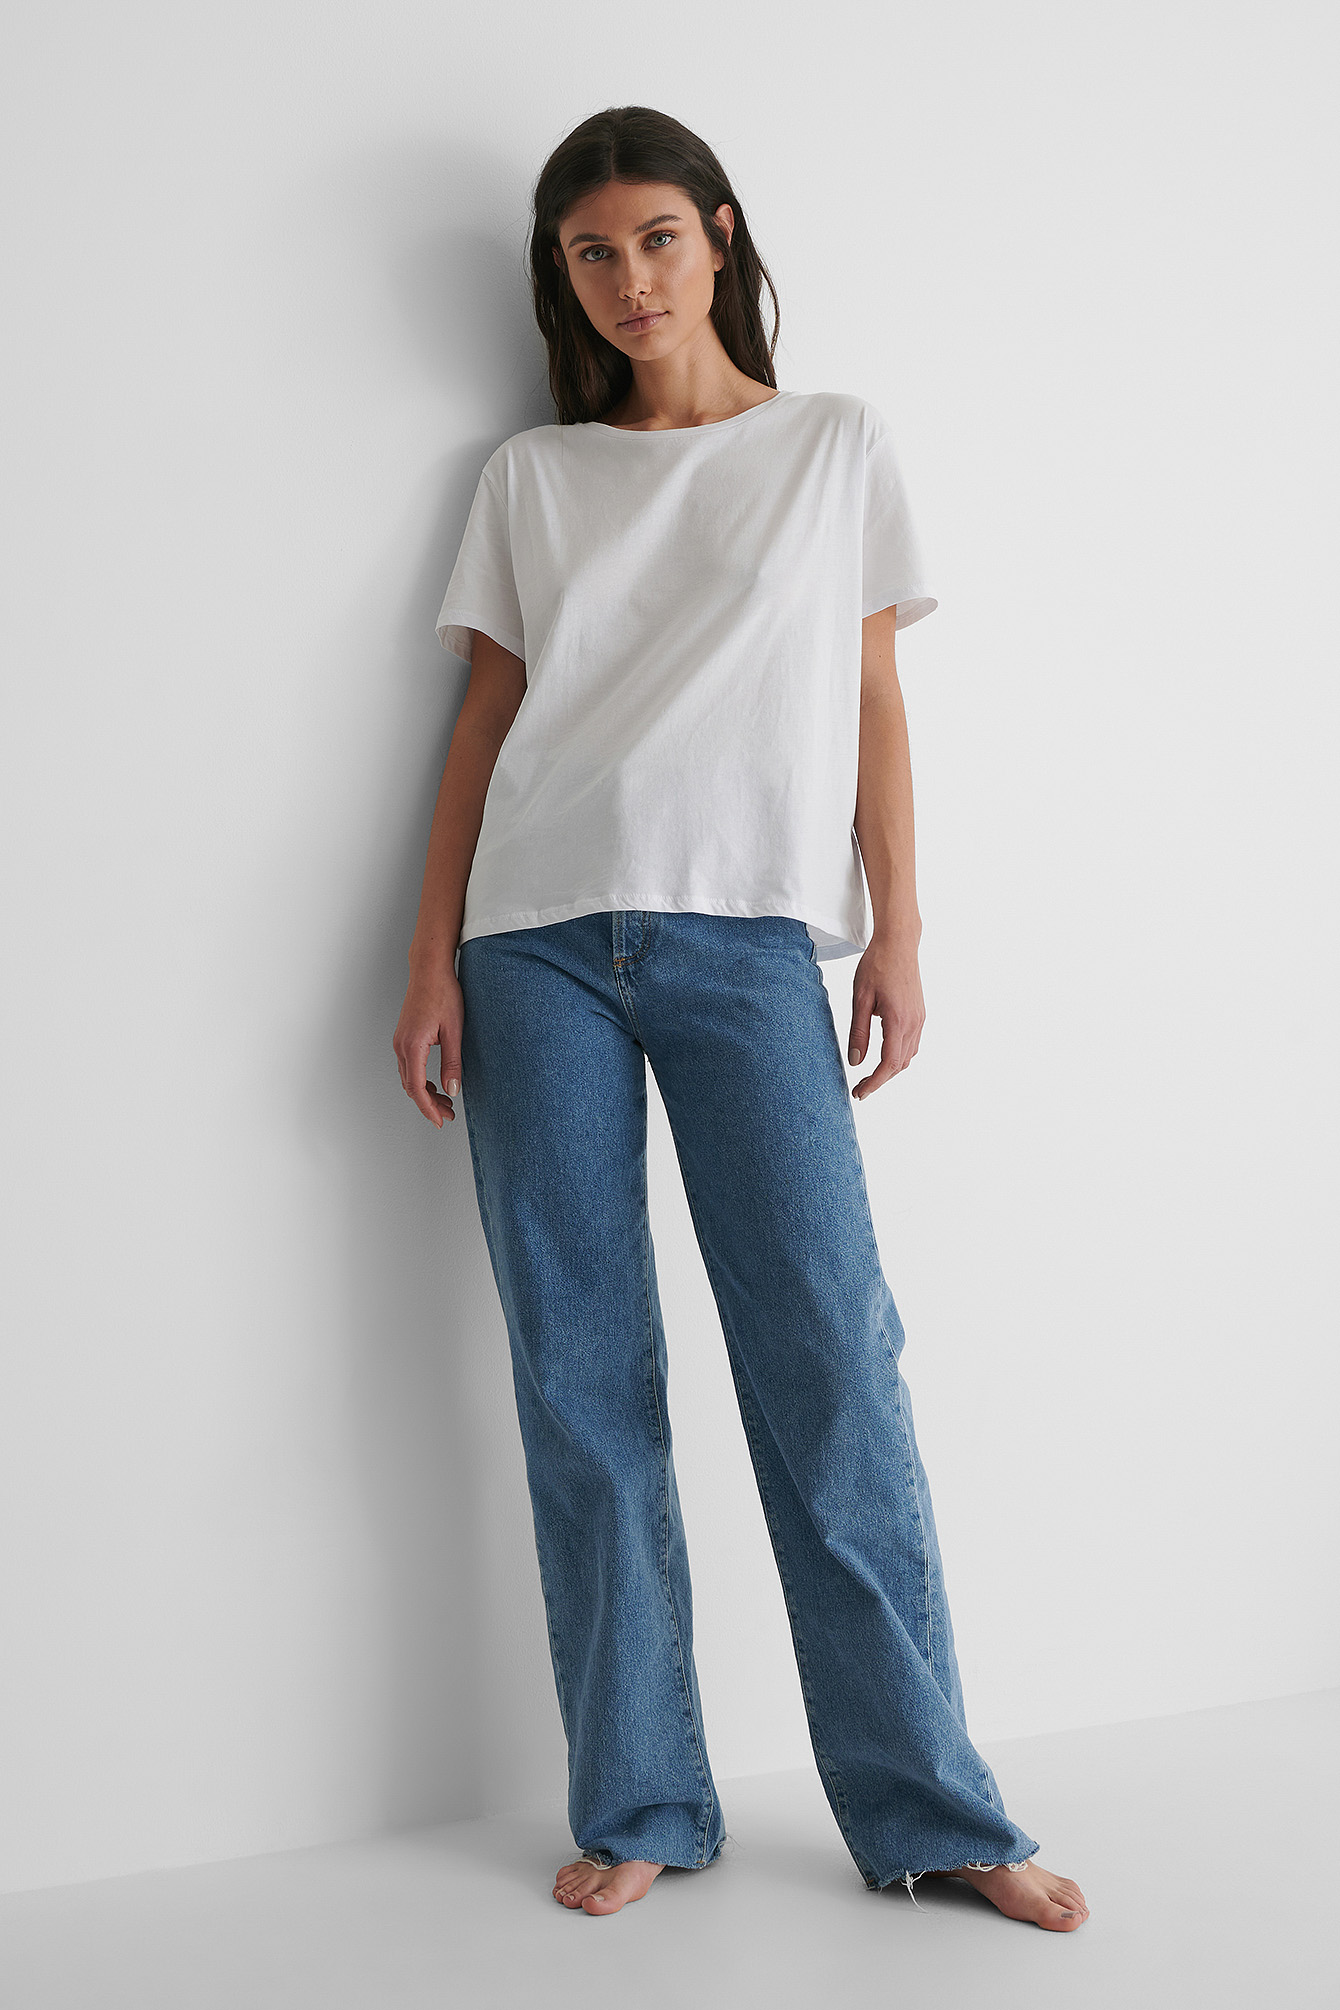 Basic Oversized Tee with Blue Jeans.